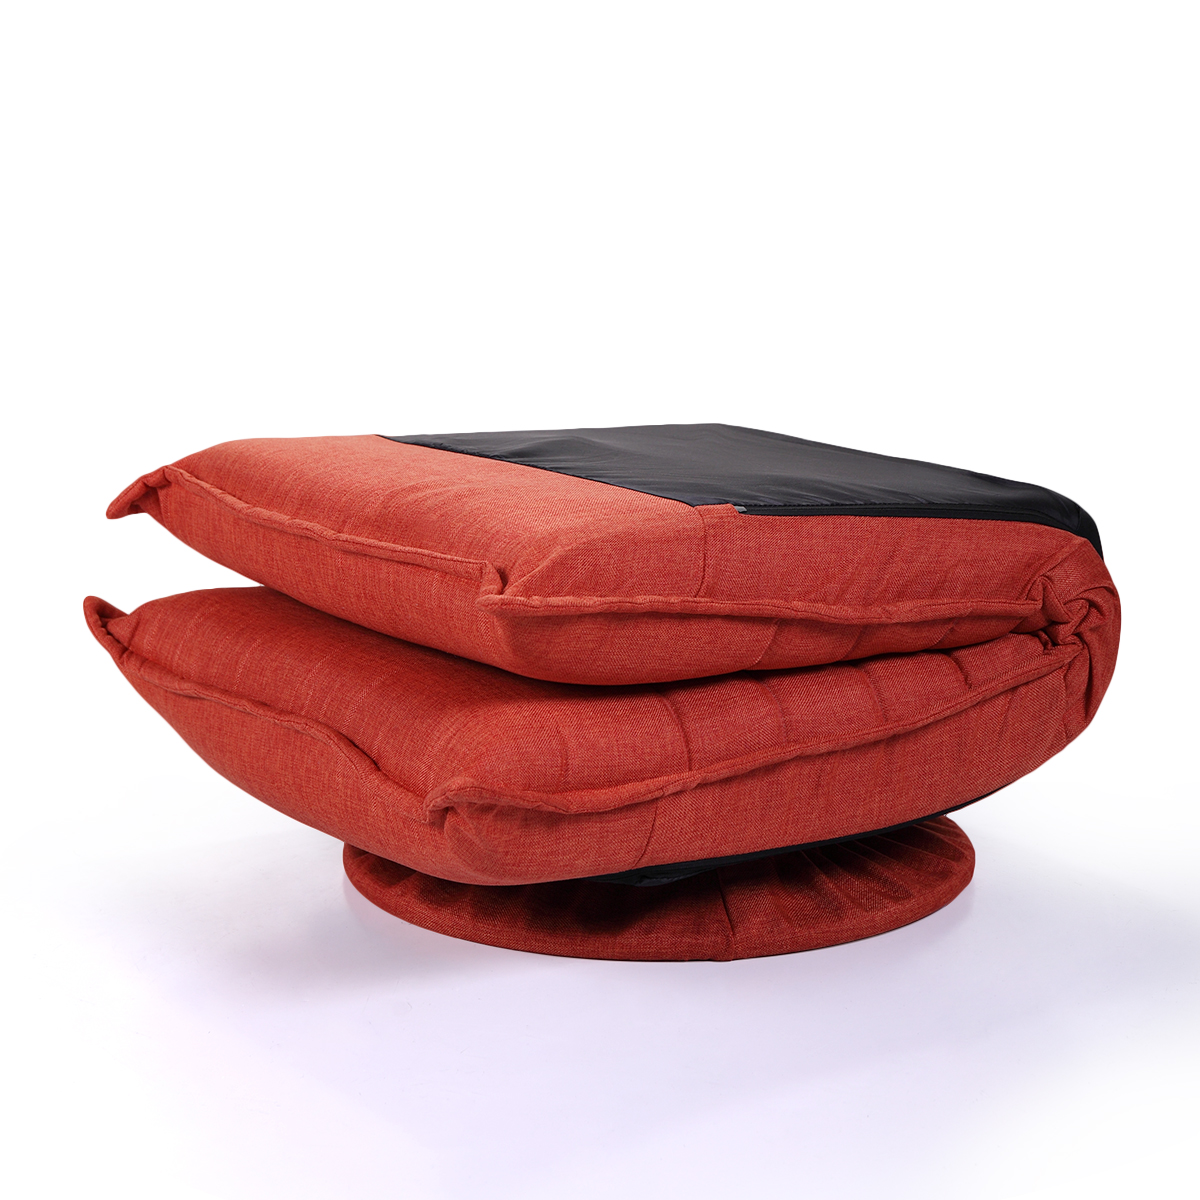 Veryke Lounge Chair, Red - image 4 of 6